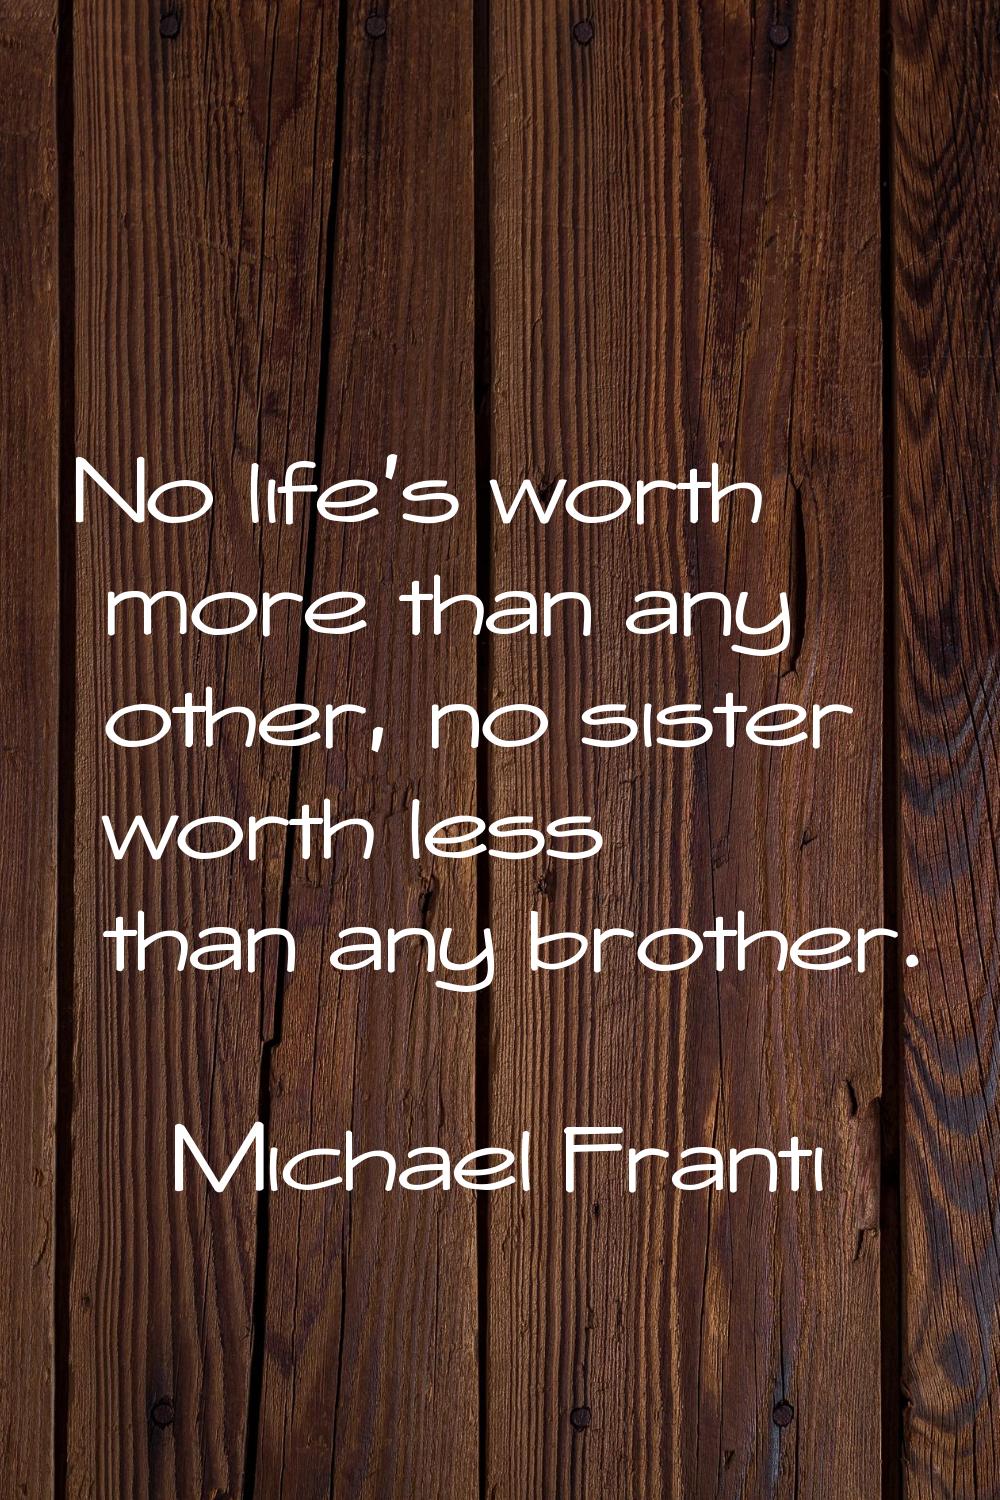 No life's worth more than any other, no sister worth less than any brother.